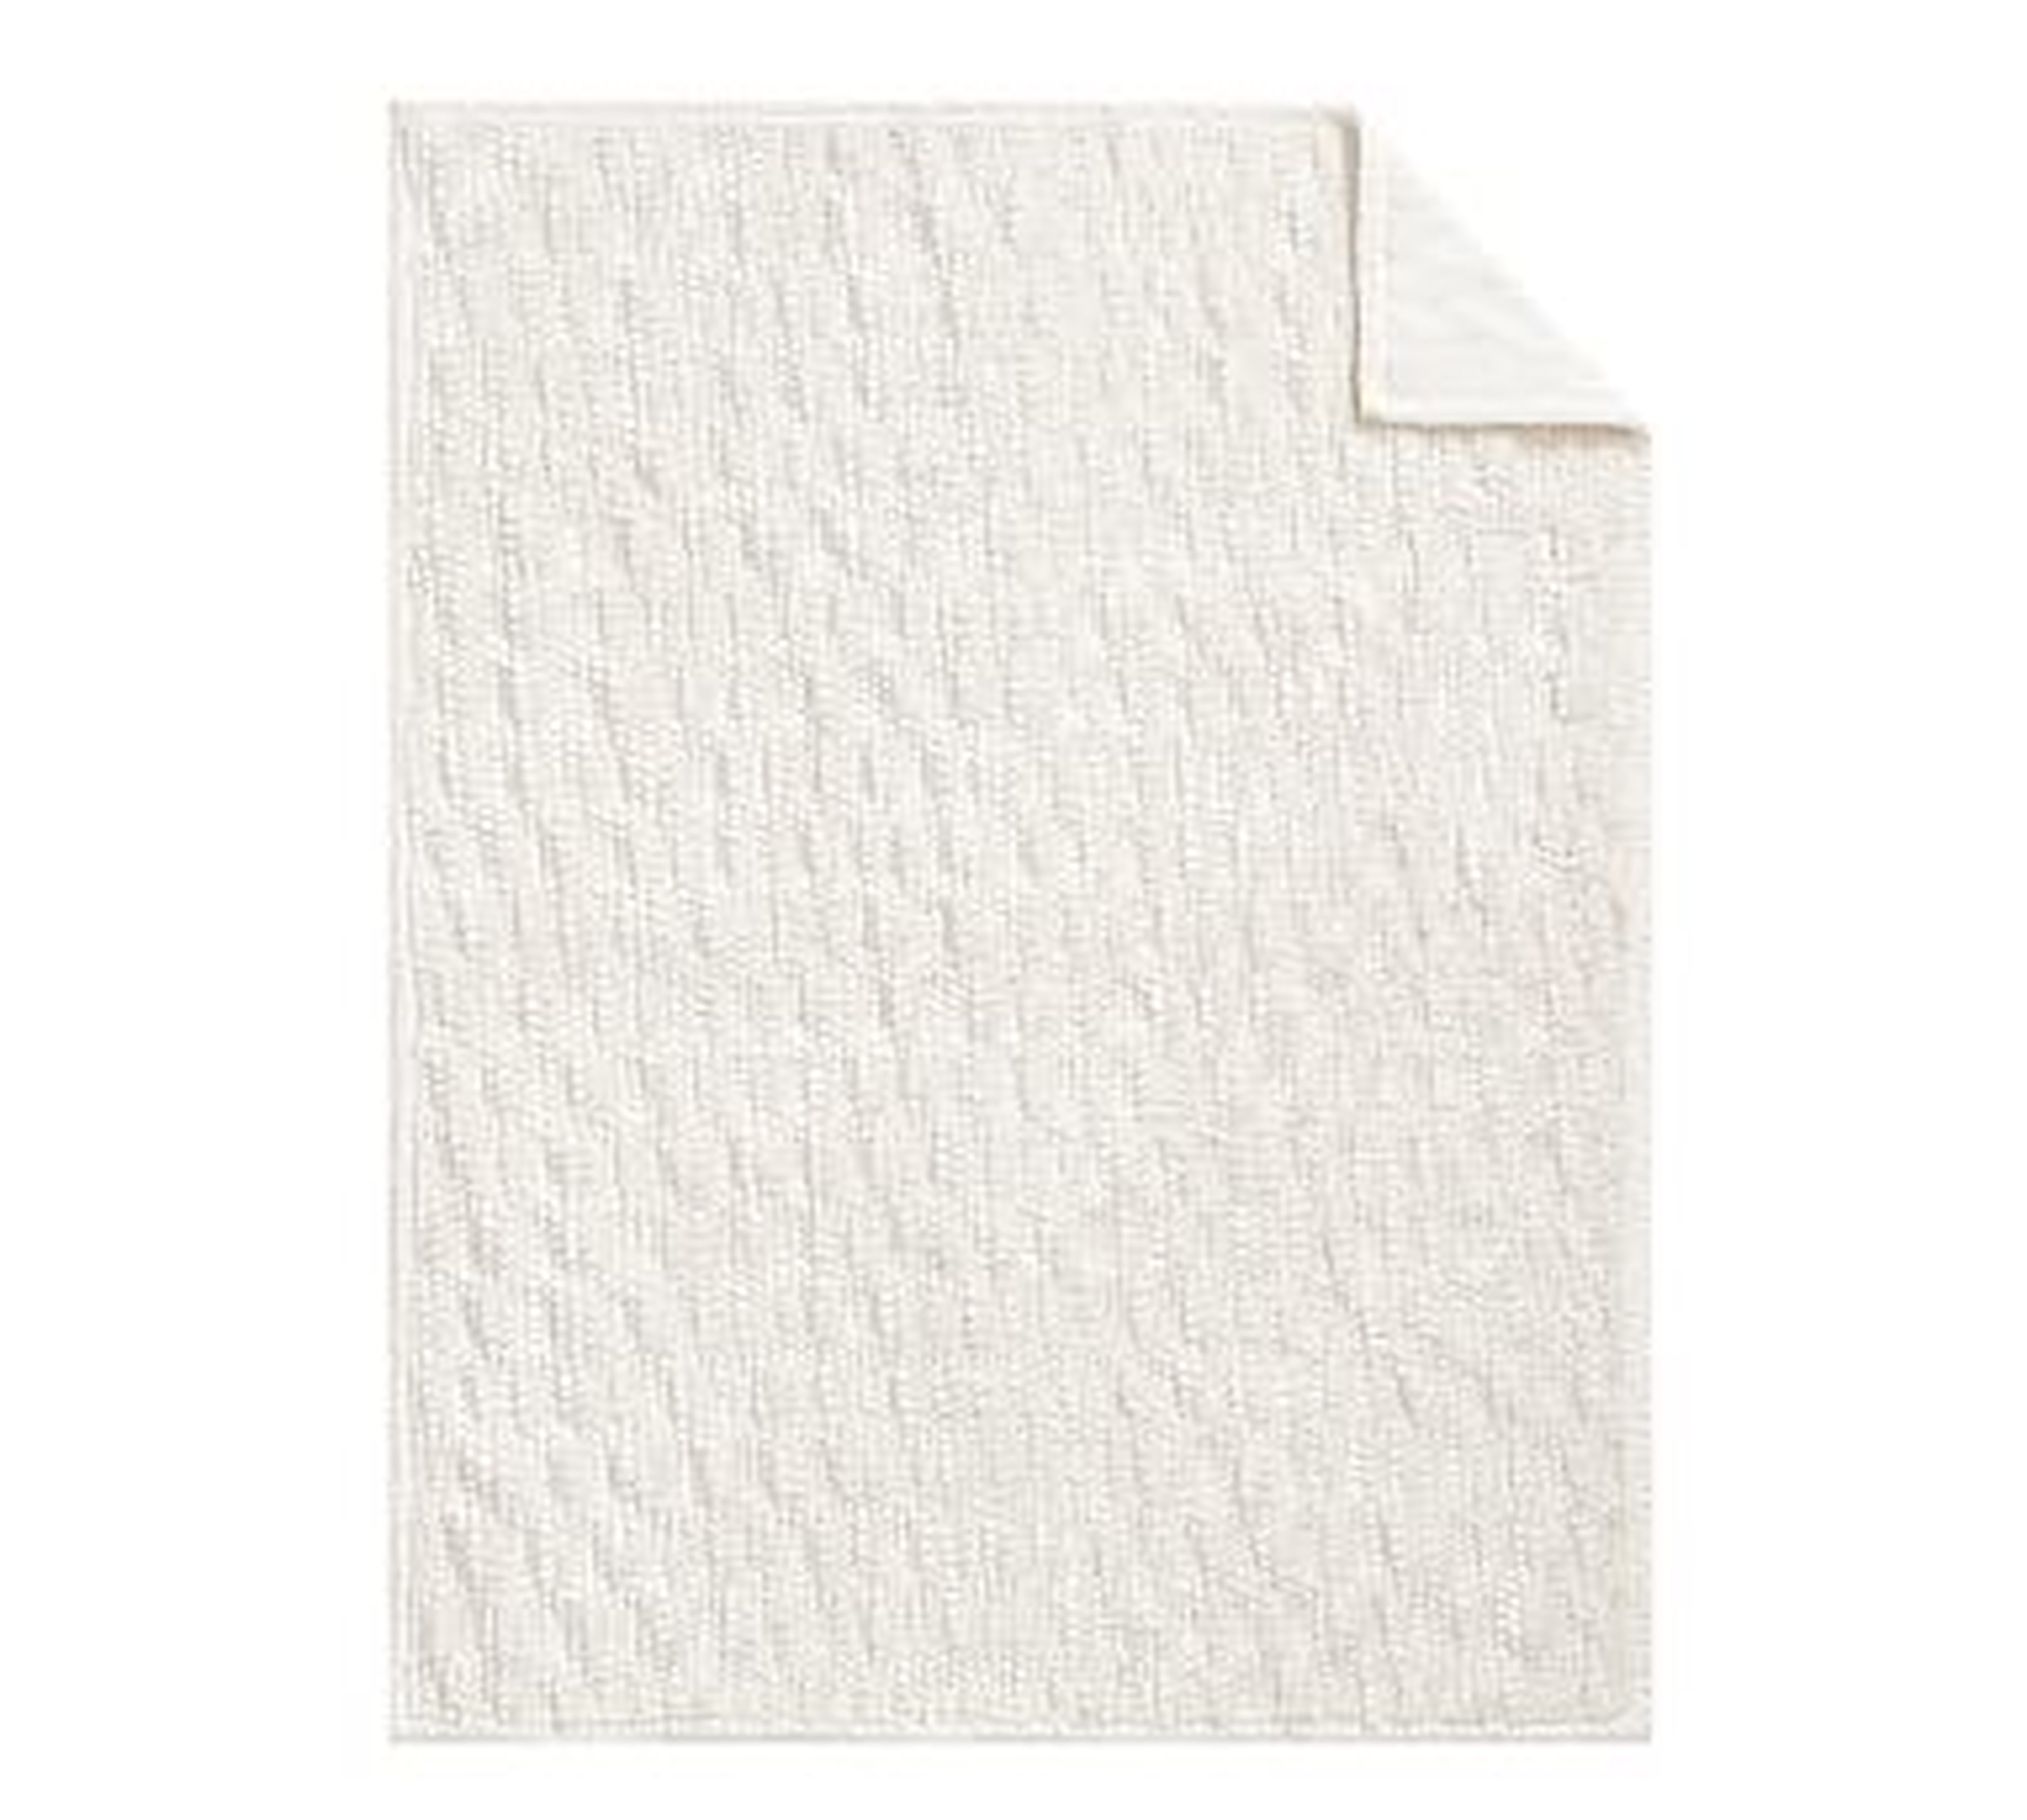 Faux Fur Throws, 50 x 60", Ivory Honeycomb - Pottery Barn